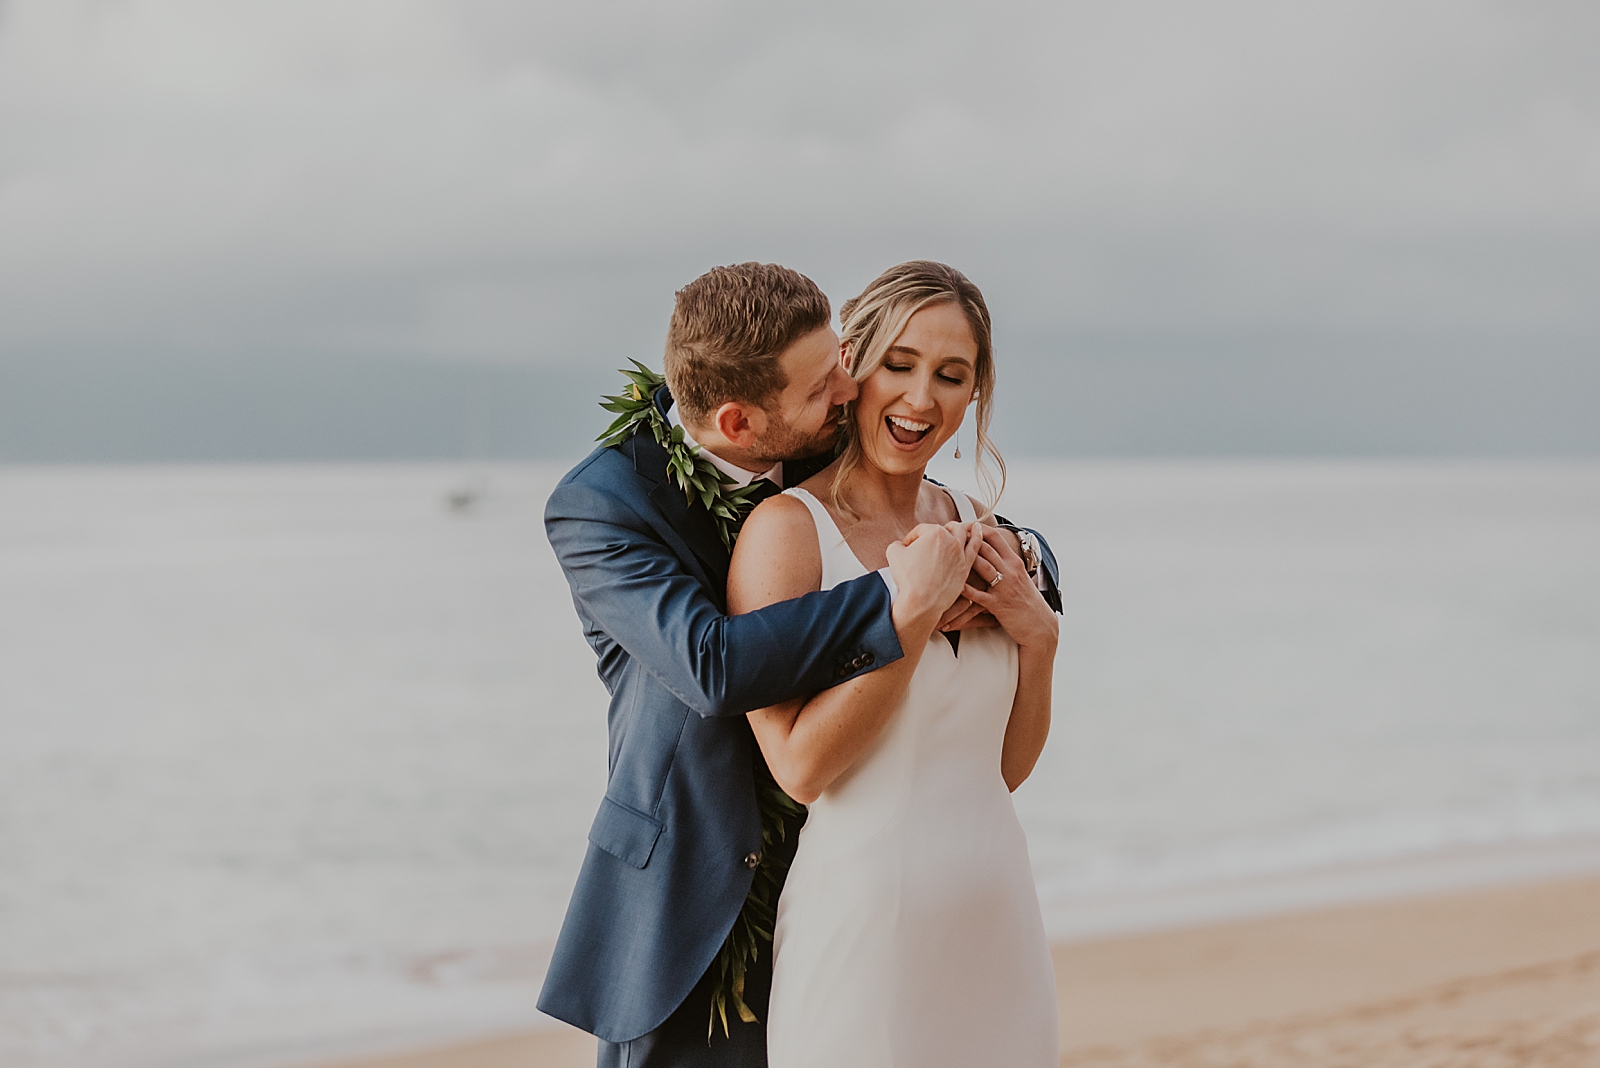 Groom holding Bride from behind and kissing her on the cheek on the beach